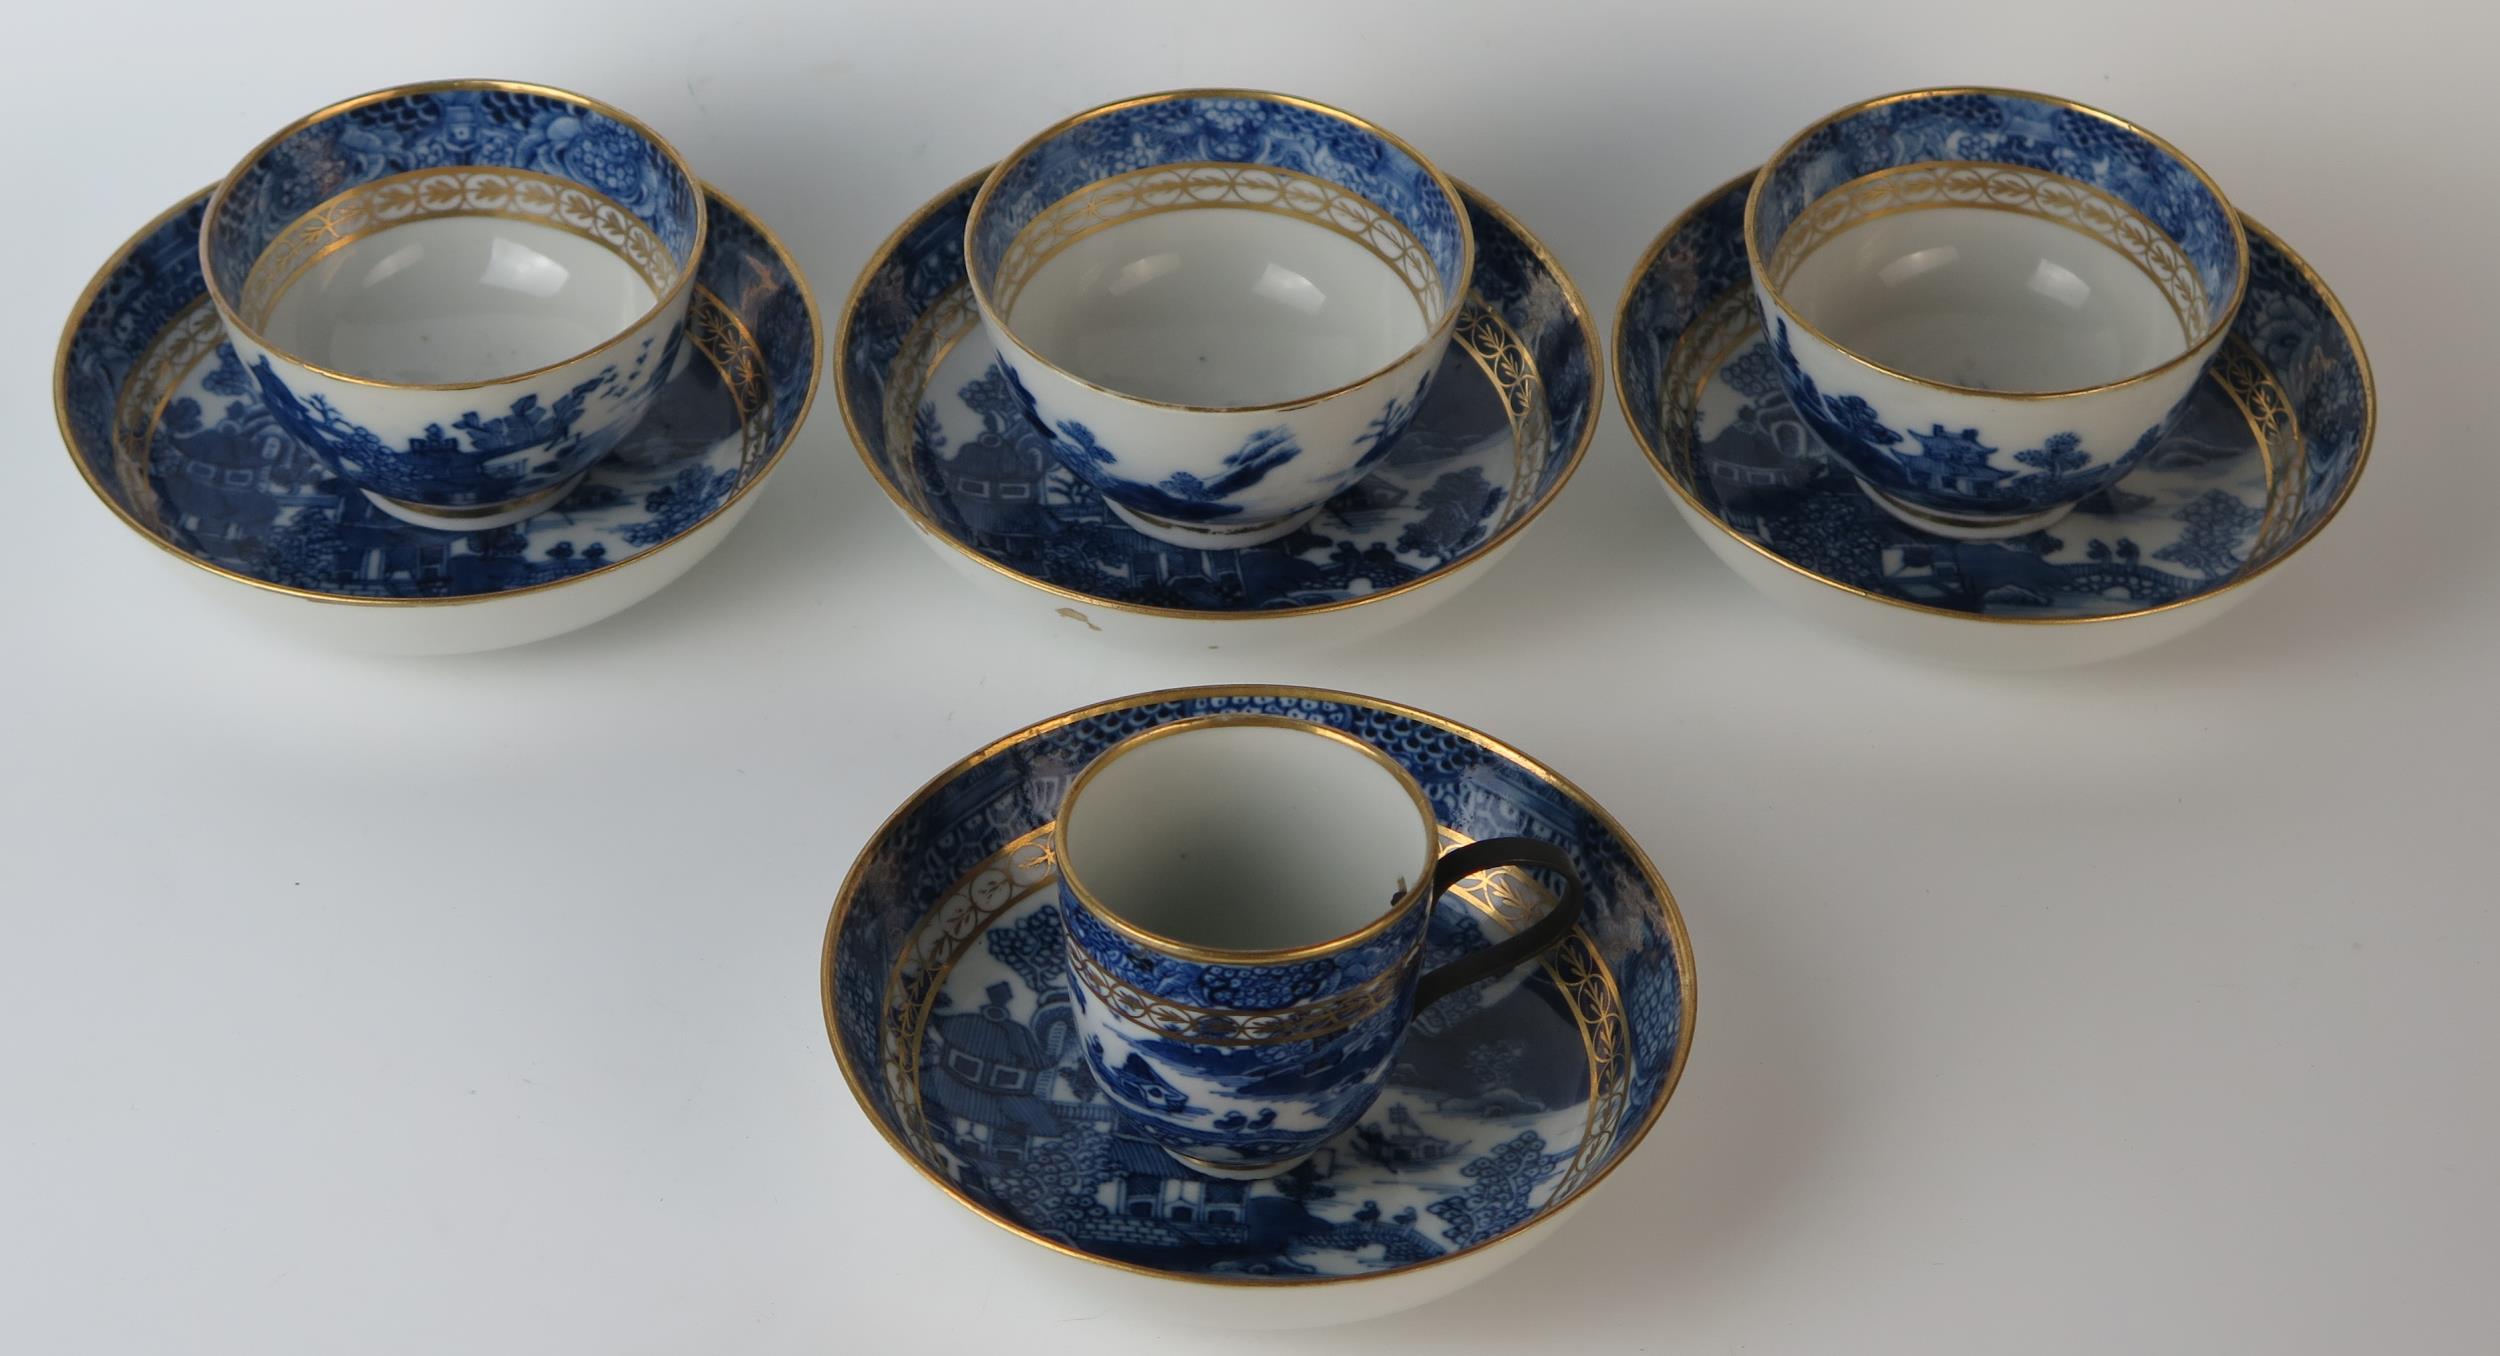 Three Late 18th Century Chinese Export Tea Bowls and Saucer Dishes, together with a coffee cup - Image 2 of 2